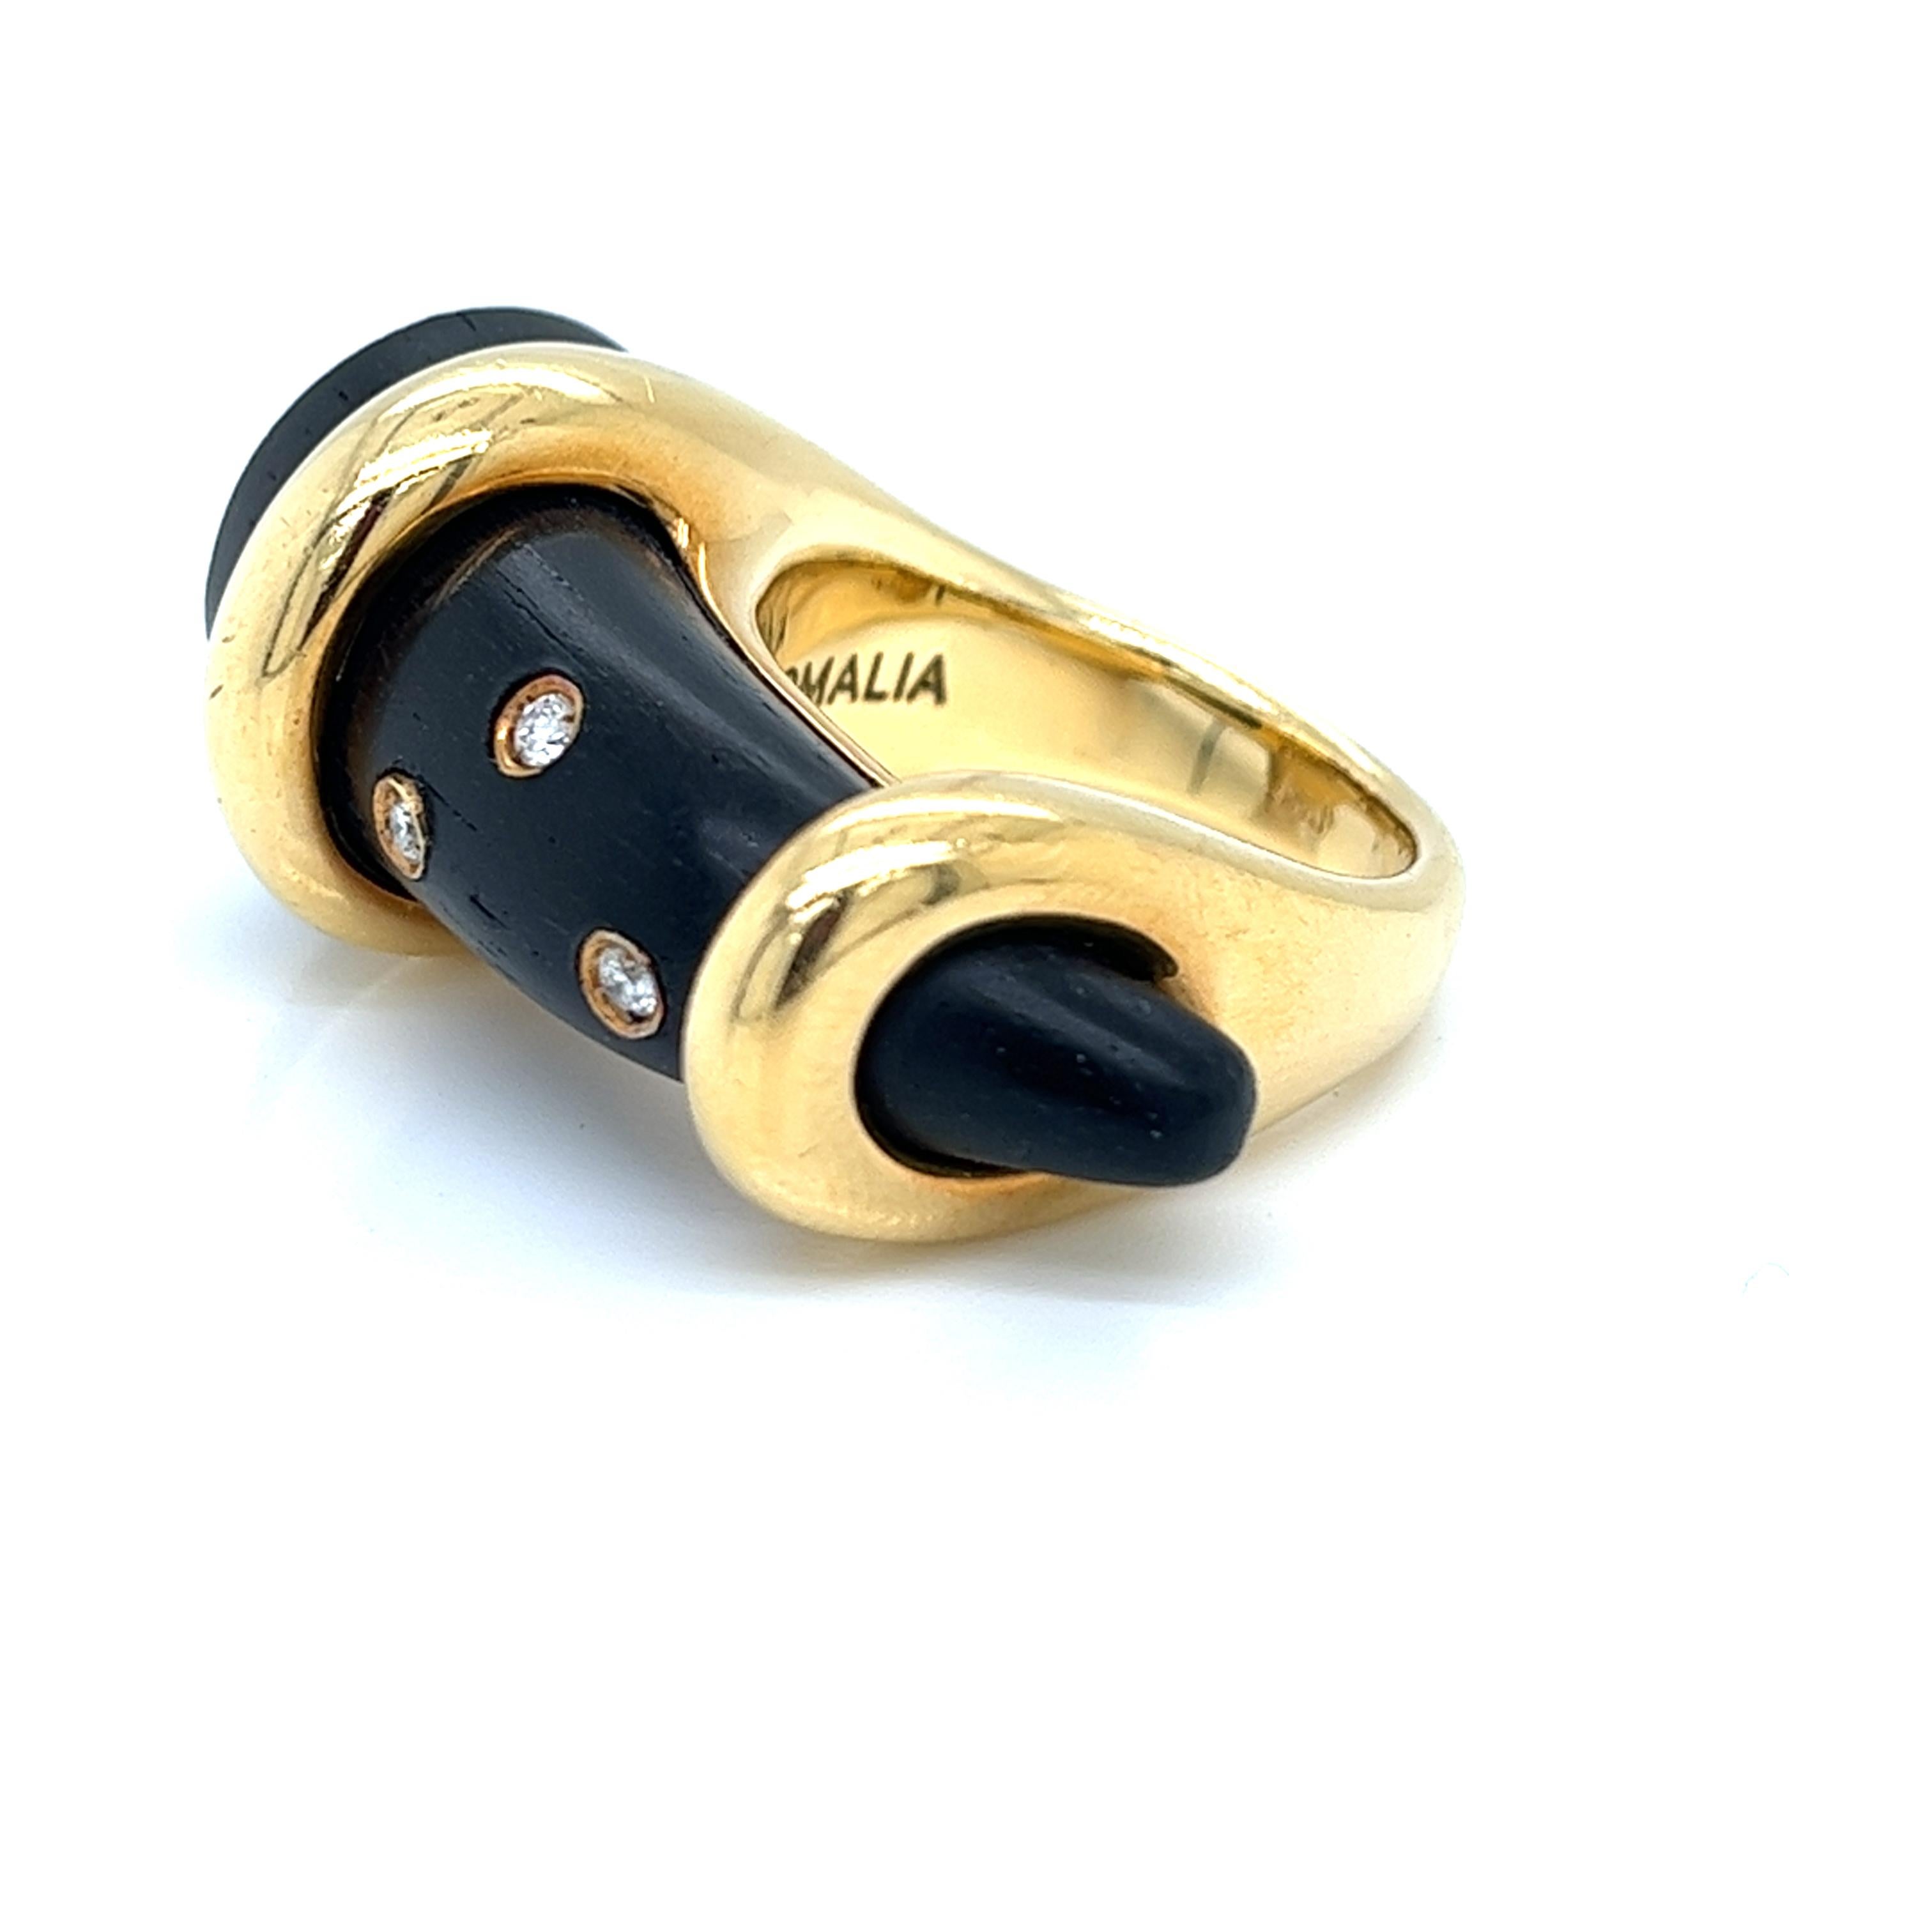 Ring 18Kt Yellow Gold, wood and Diamonds Italy Oromalia designer  In Excellent Condition For Sale In Miami, FL